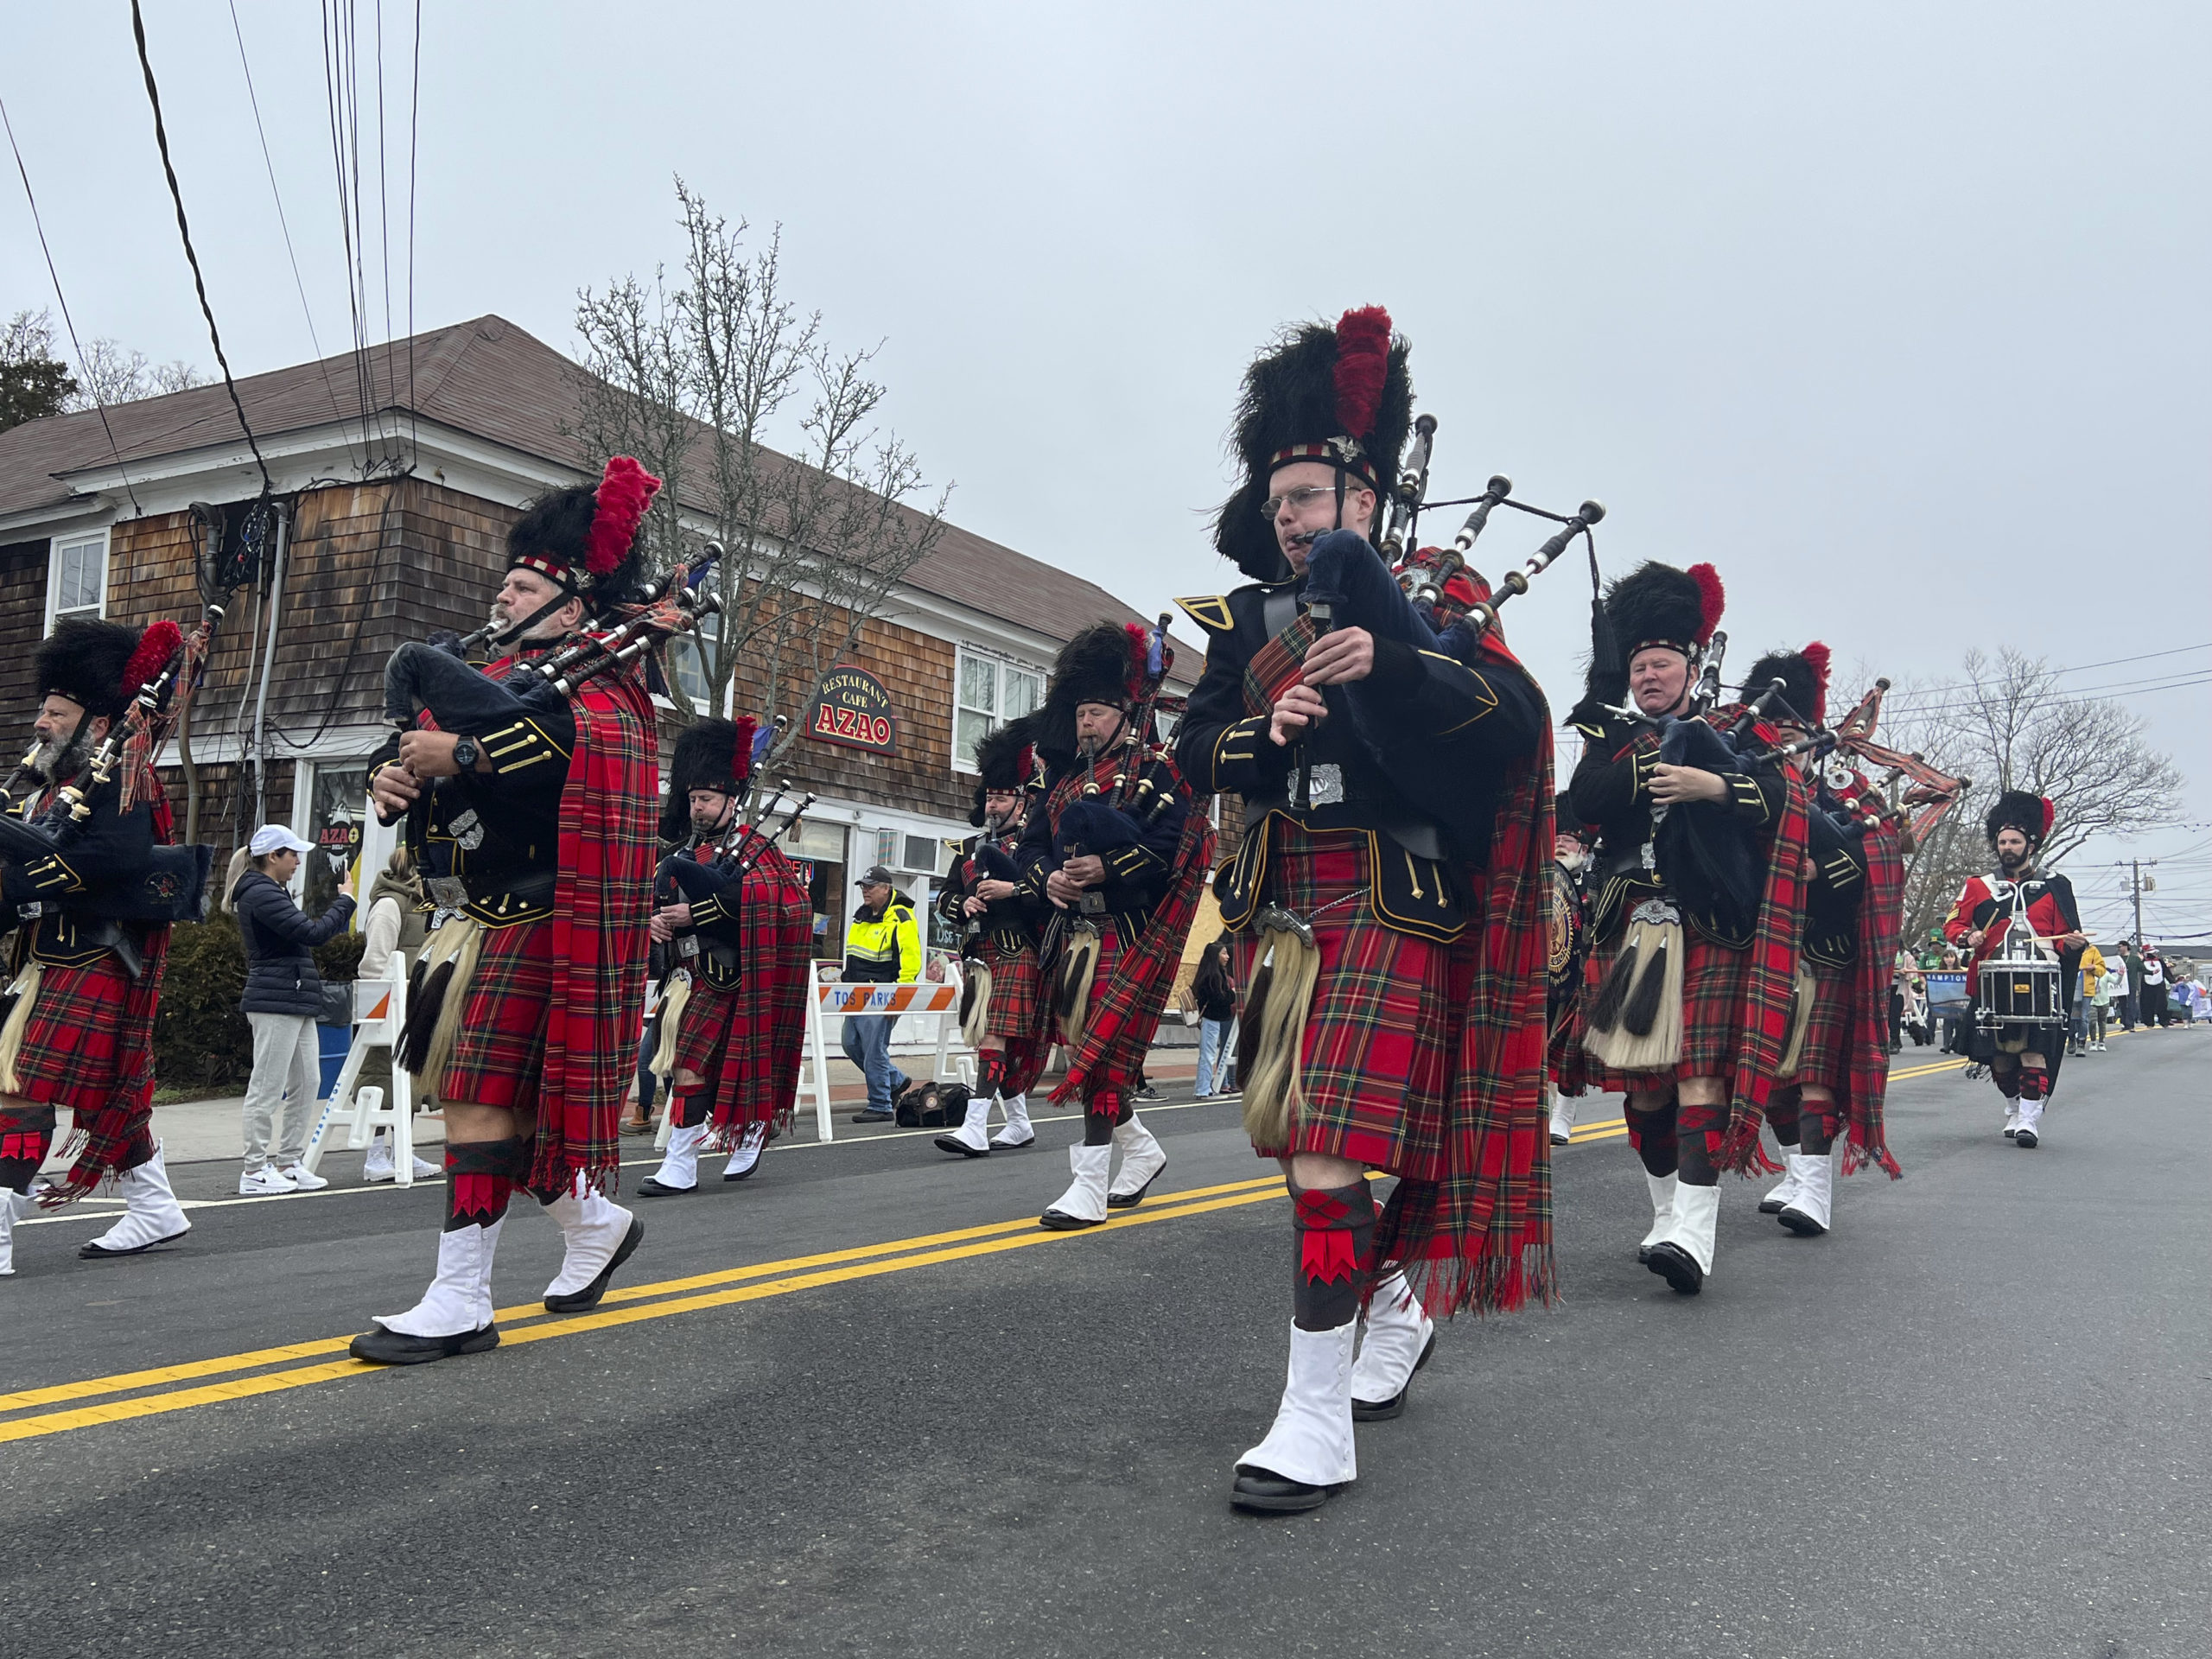 Hampton Bays Hosts St. Pat's Day Parade After Two Year COVID Hiatus 27 East